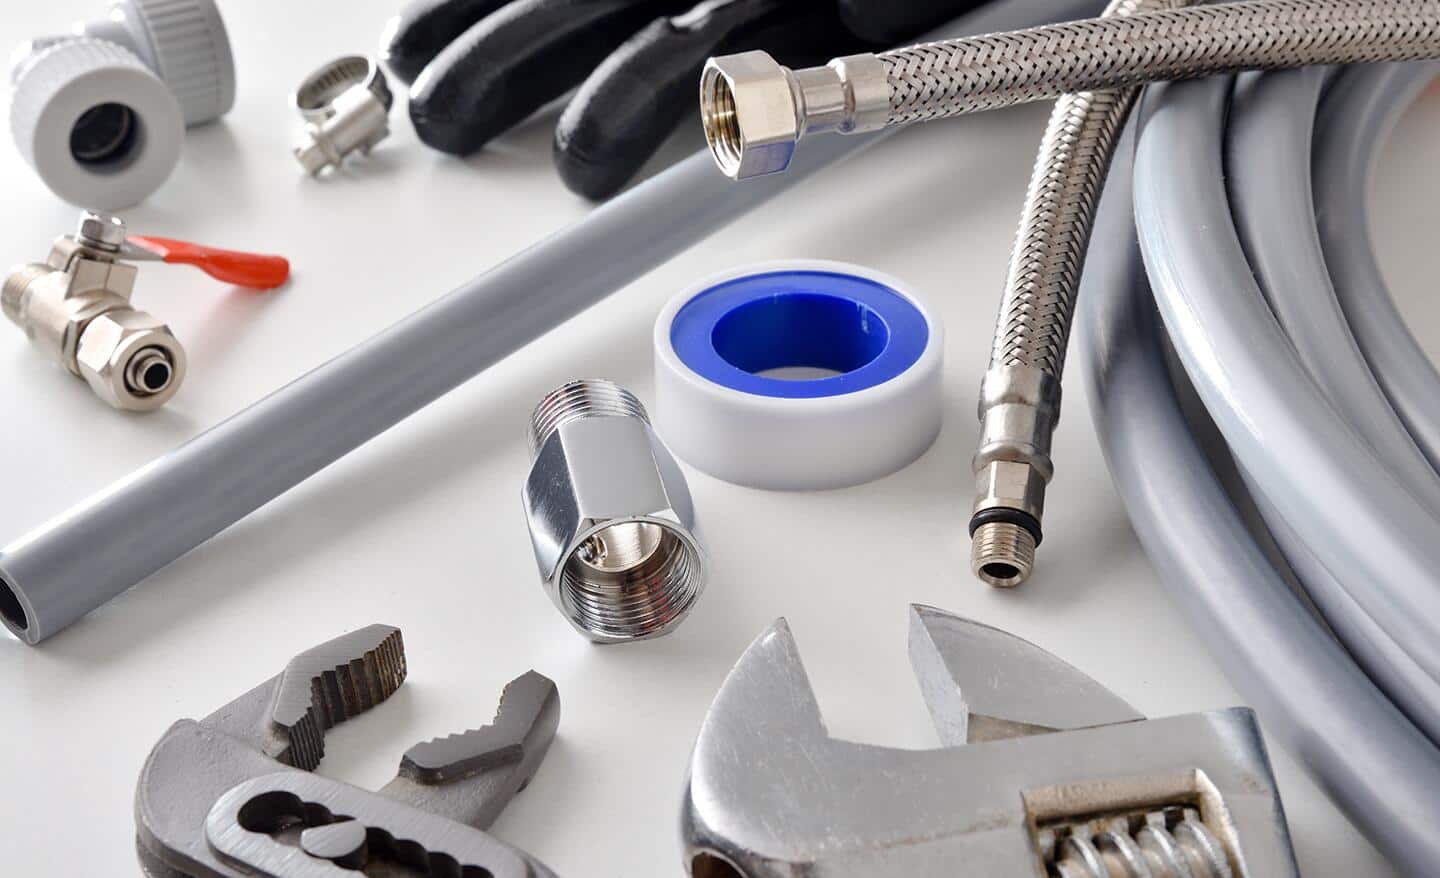 Wrenches, galvanized steel tubing and other materials for installing a refrigerator water line.